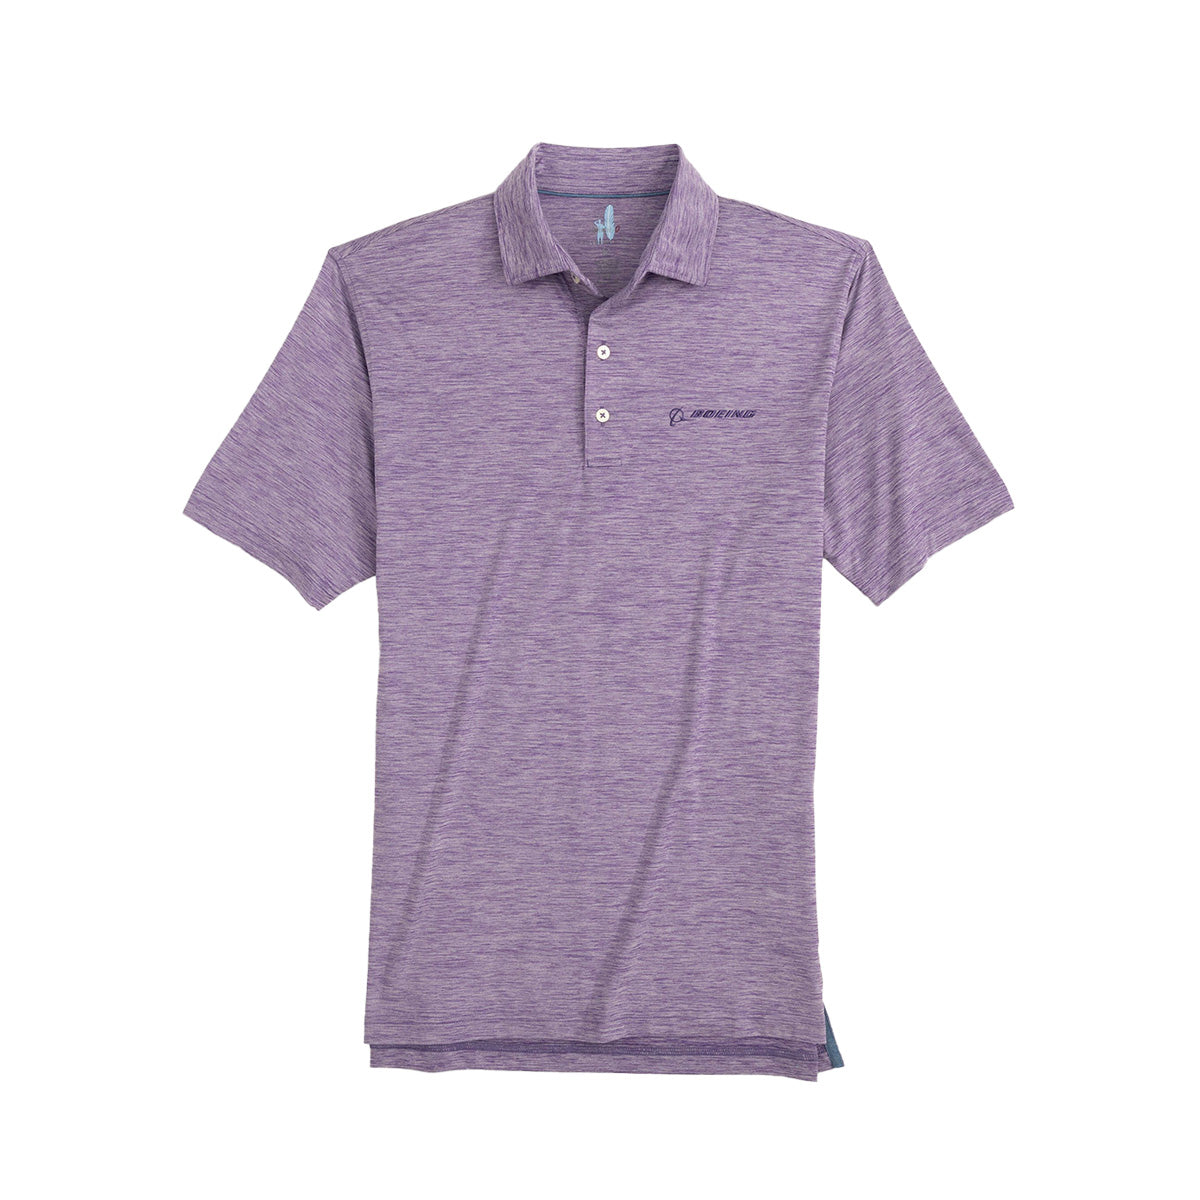 Full product image of the polo in purple color.  Purple Boeing signature logo on left chest.  Featuring 3 buttons. 